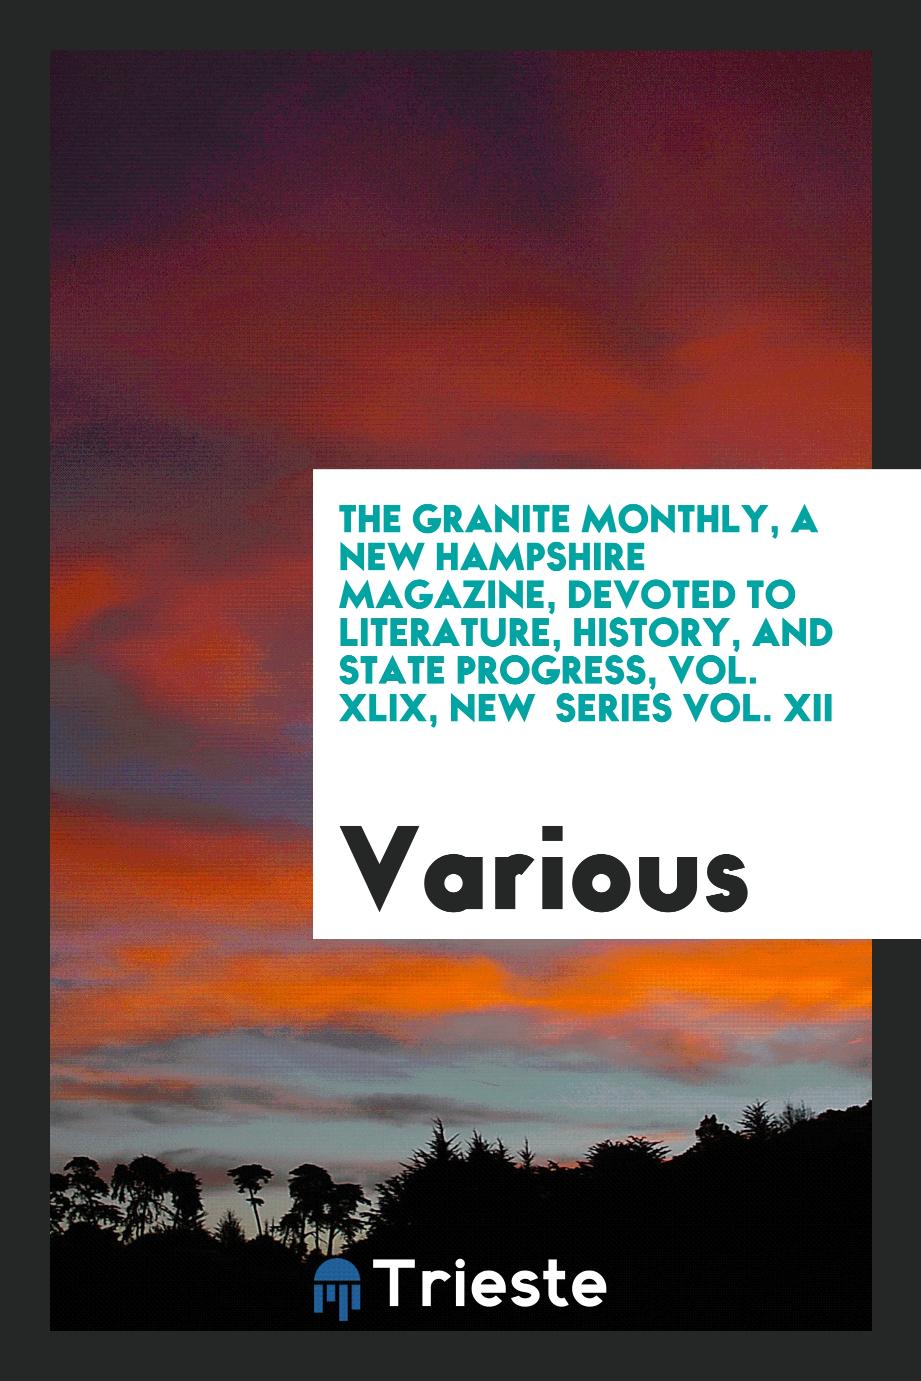 The Granite monthly, a New Hampshire magazine, devoted to literature, history, and state progress, Vol. XLIX, new series Vol. XII